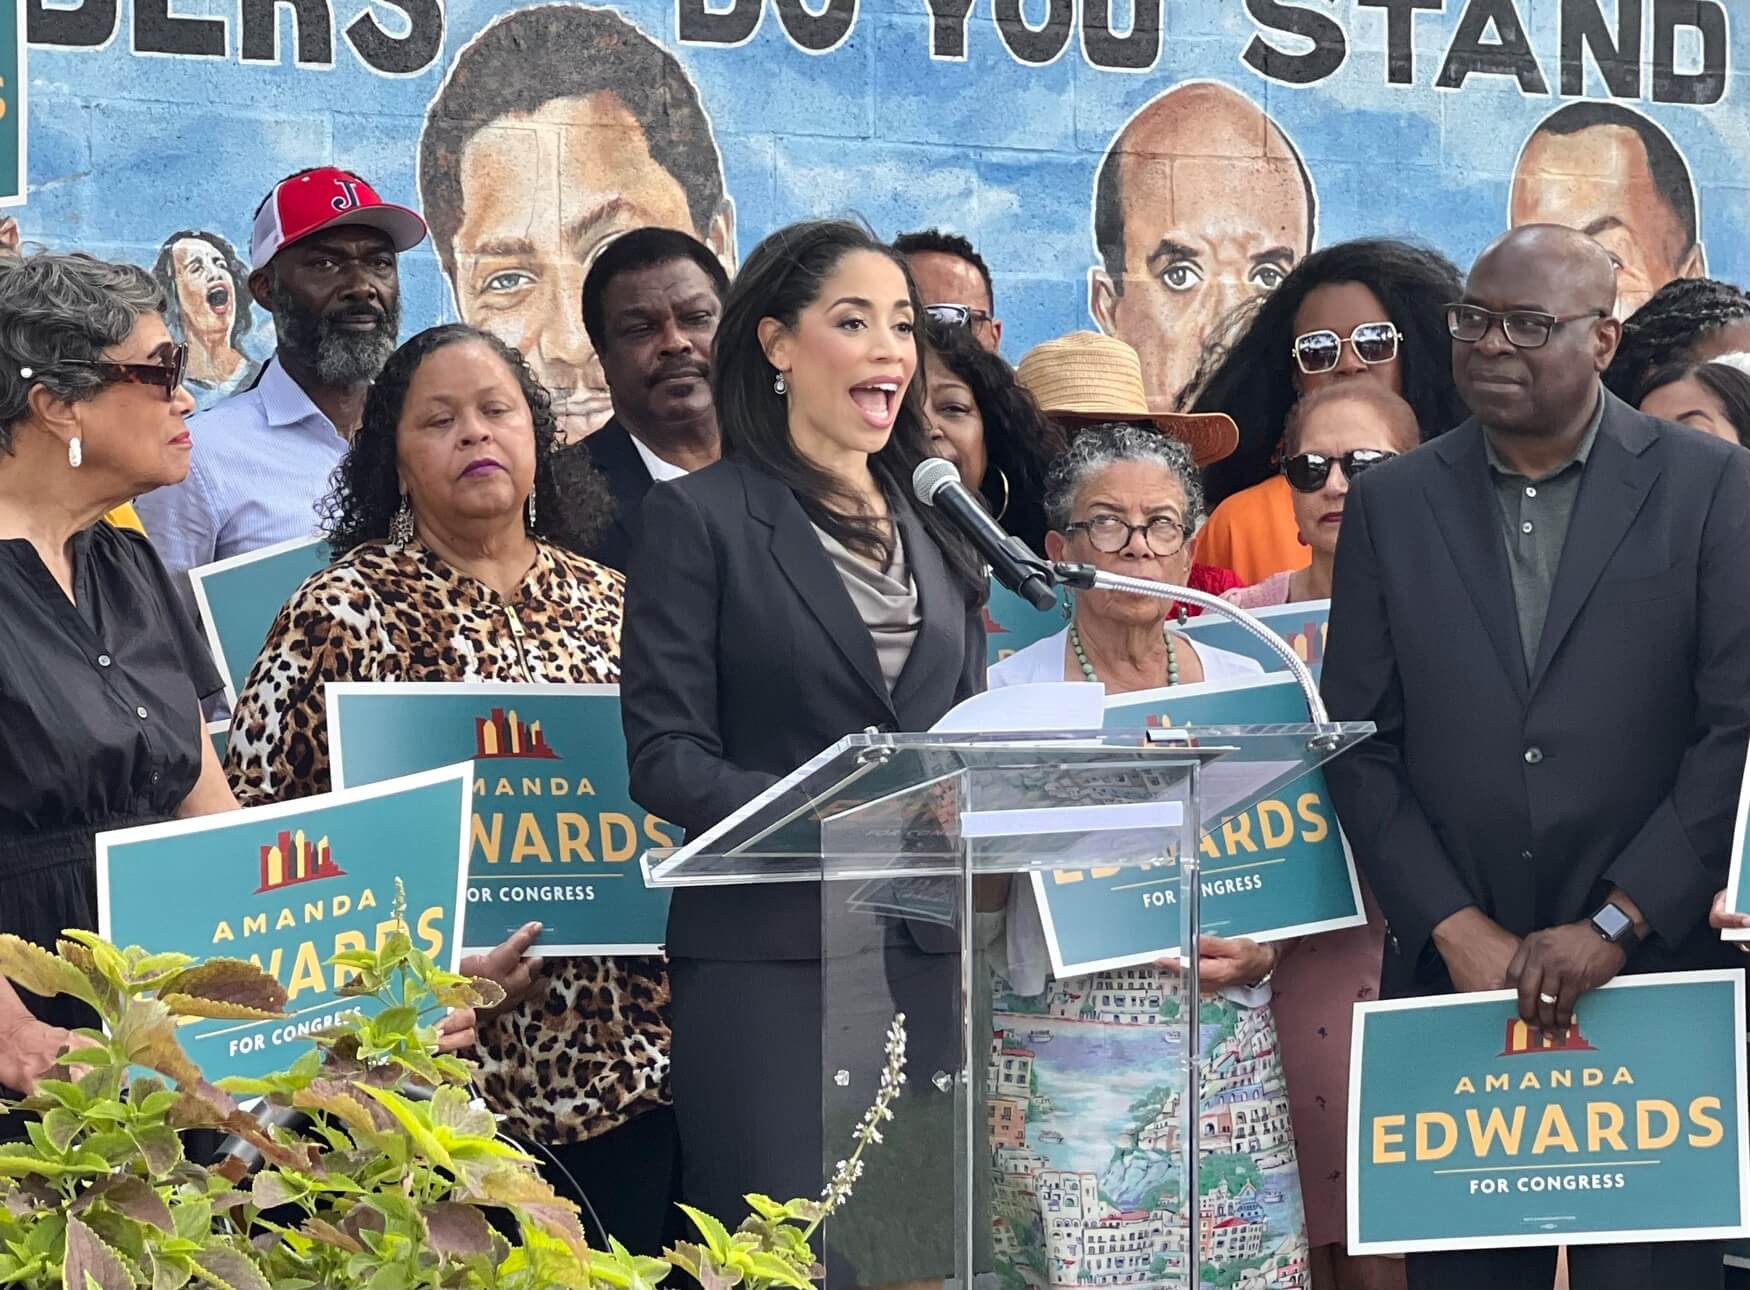 Amanda Edwards launches campaign for Congresss in Houston